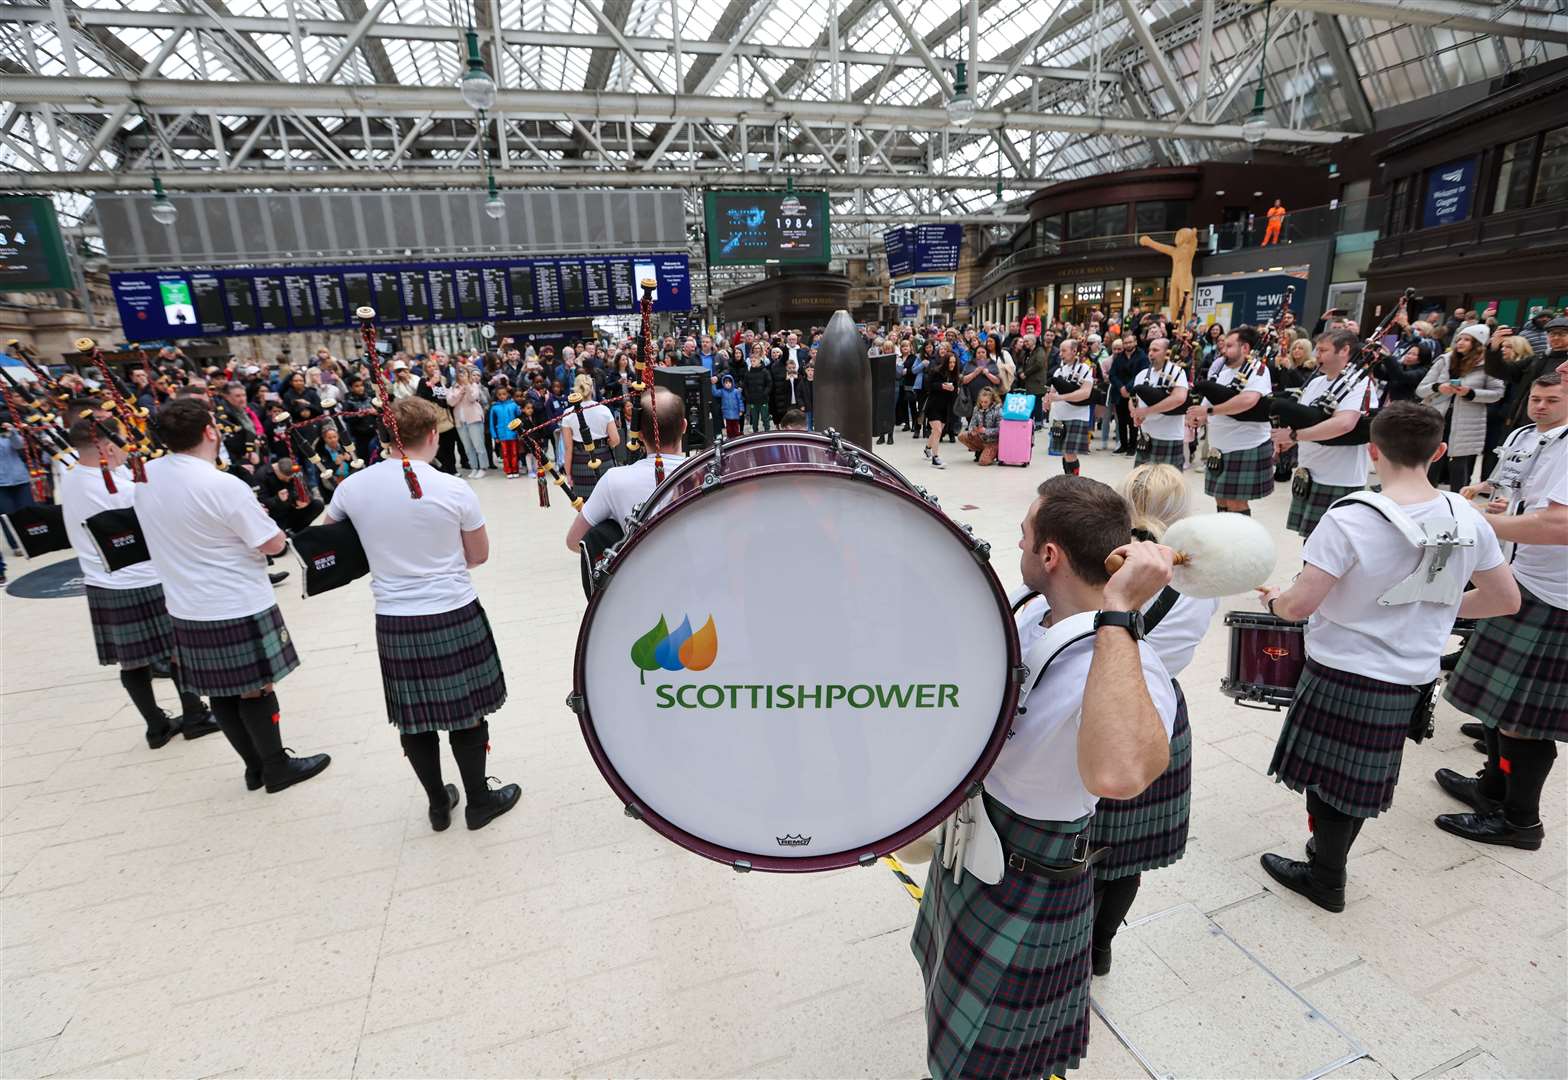 Crowds gathered to watch the band perform on Saturday afternoon (ScottishPower/PA)